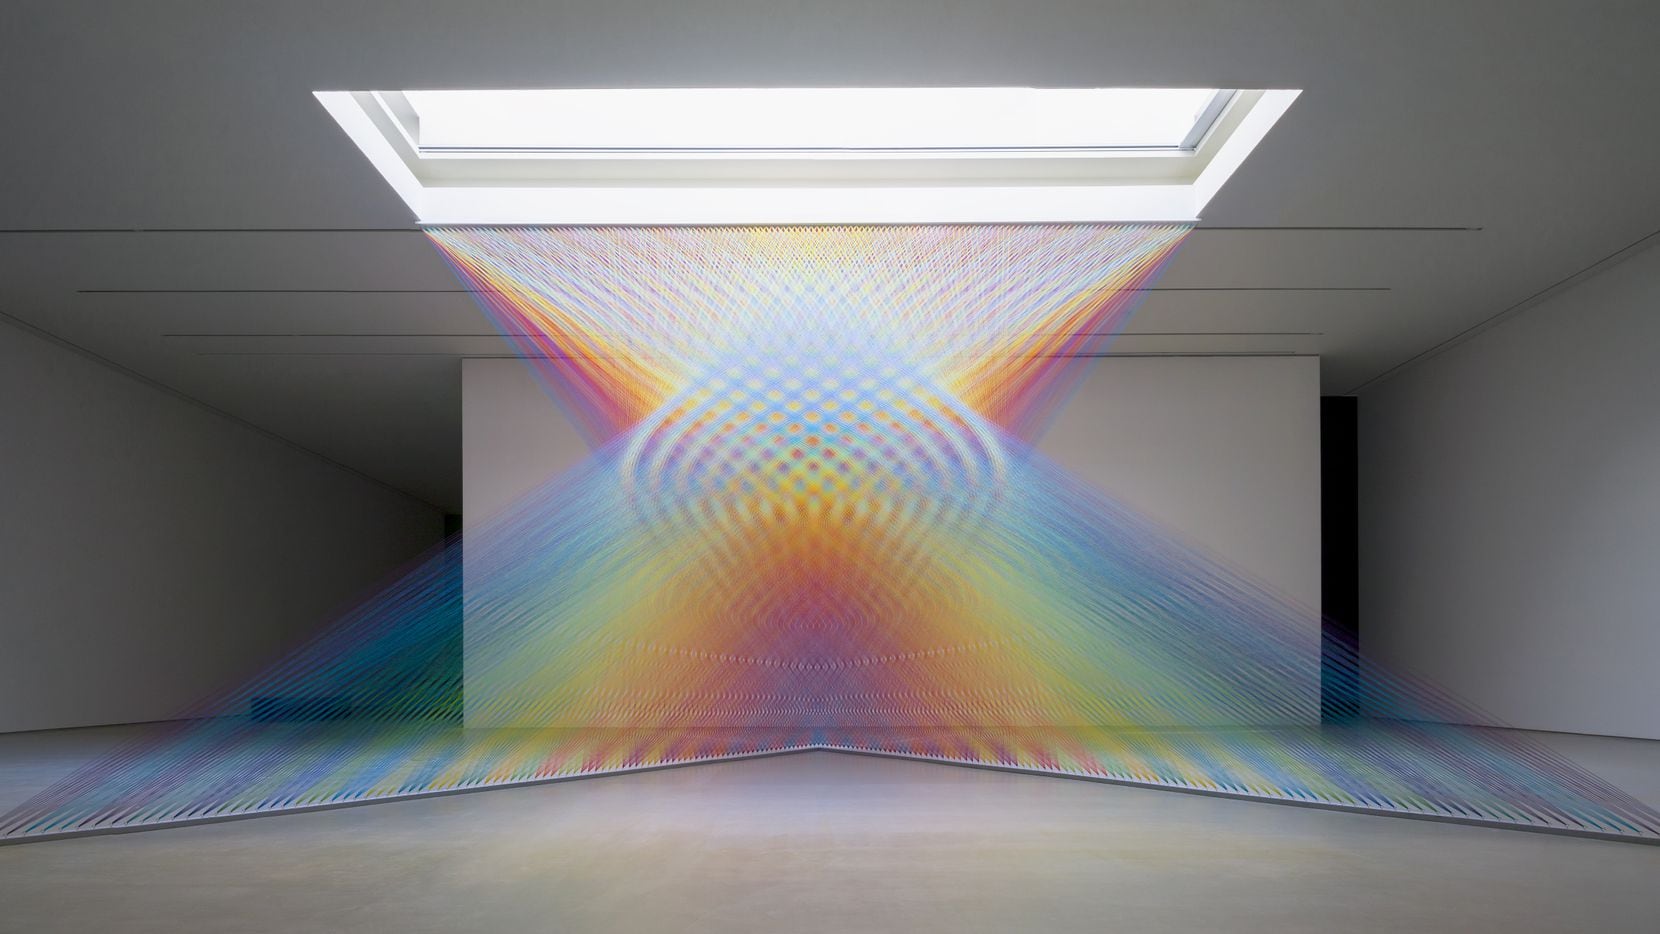 Work by artist Gabriel Dawe is part of the Pandemic Faire, a digital art exhibition created in response to the shutdown of physical art spaces after the coronavirus crisis in 2020.